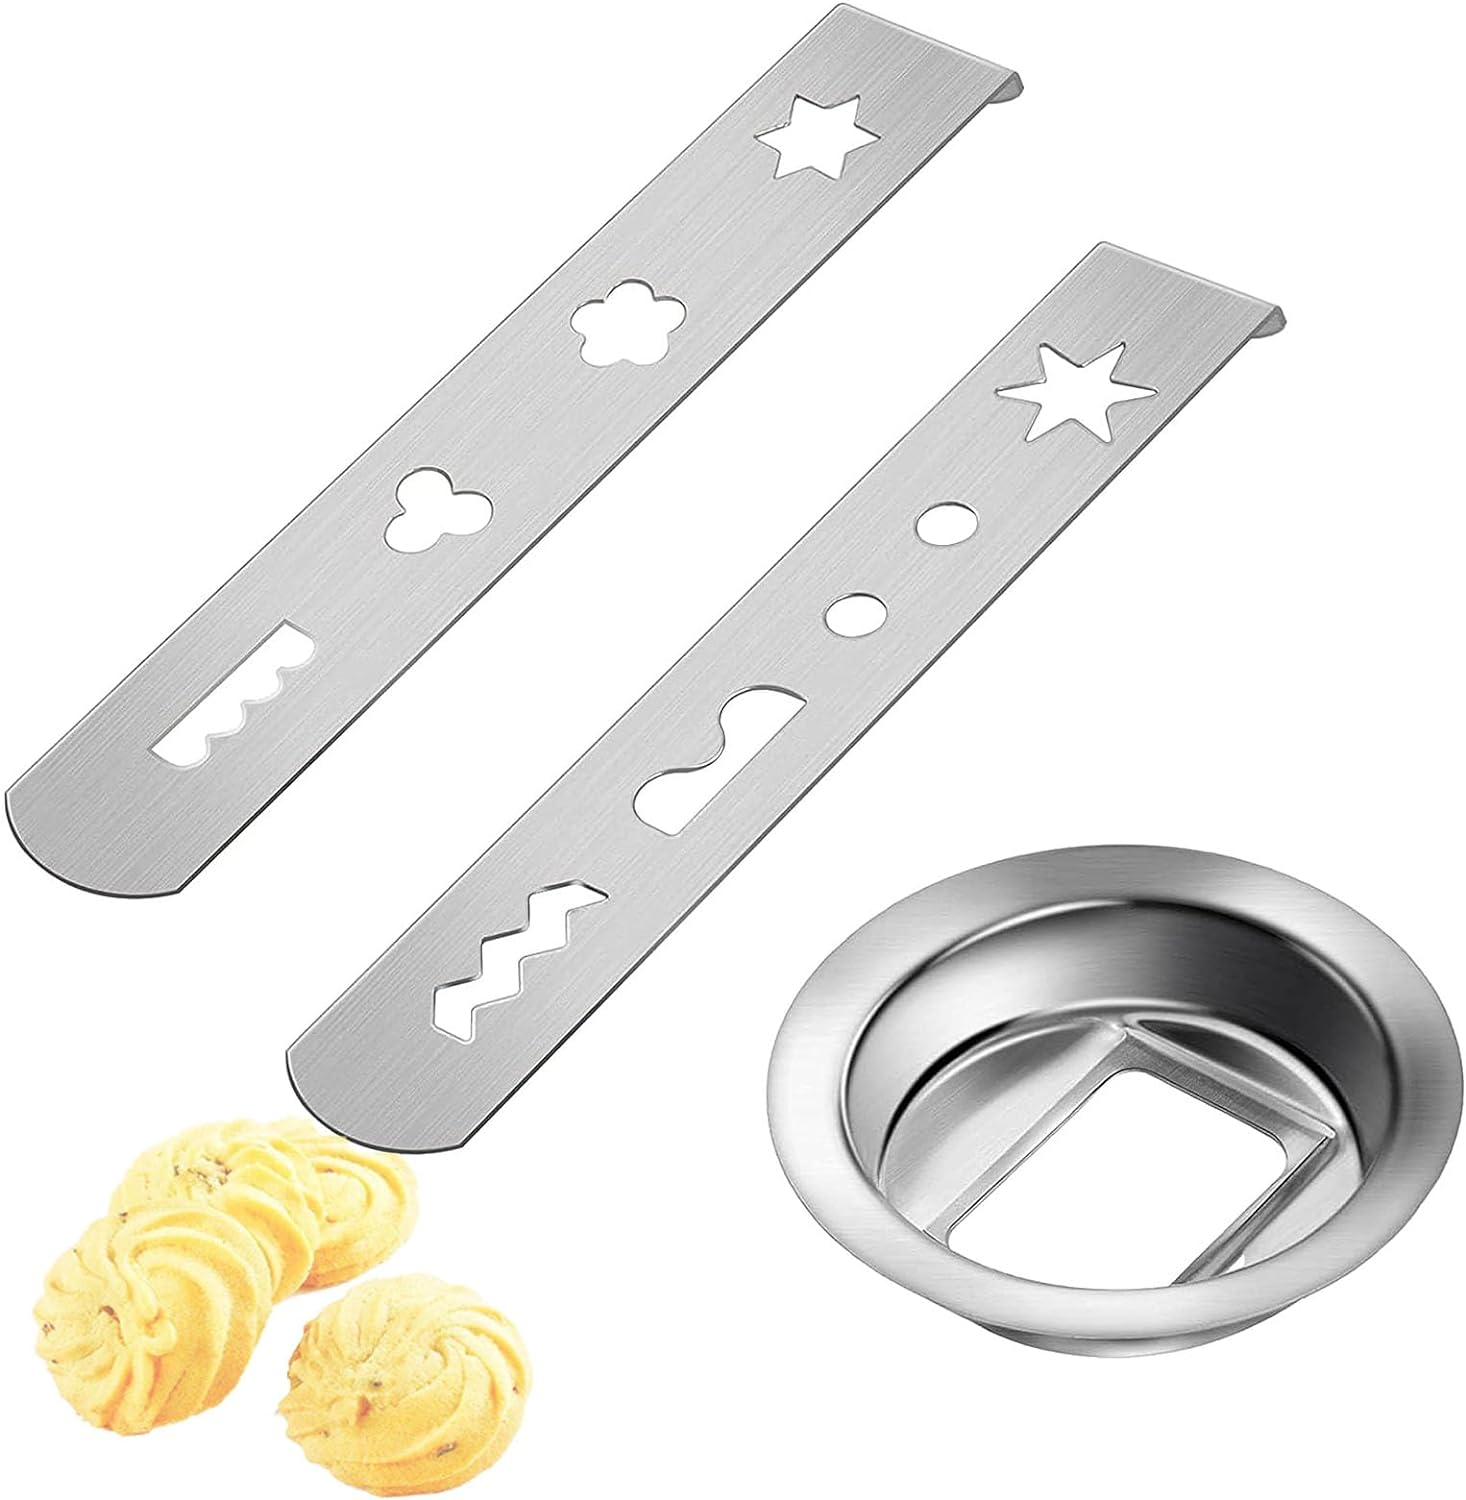 8 Shapes Stainless Steel Biscuit Attachment for Meat Mincer, Biscuit Attachment Mincer, with Connection Ring for Stainless Steel Nozzle, Biscuit Accessories for MUM4/MUM5